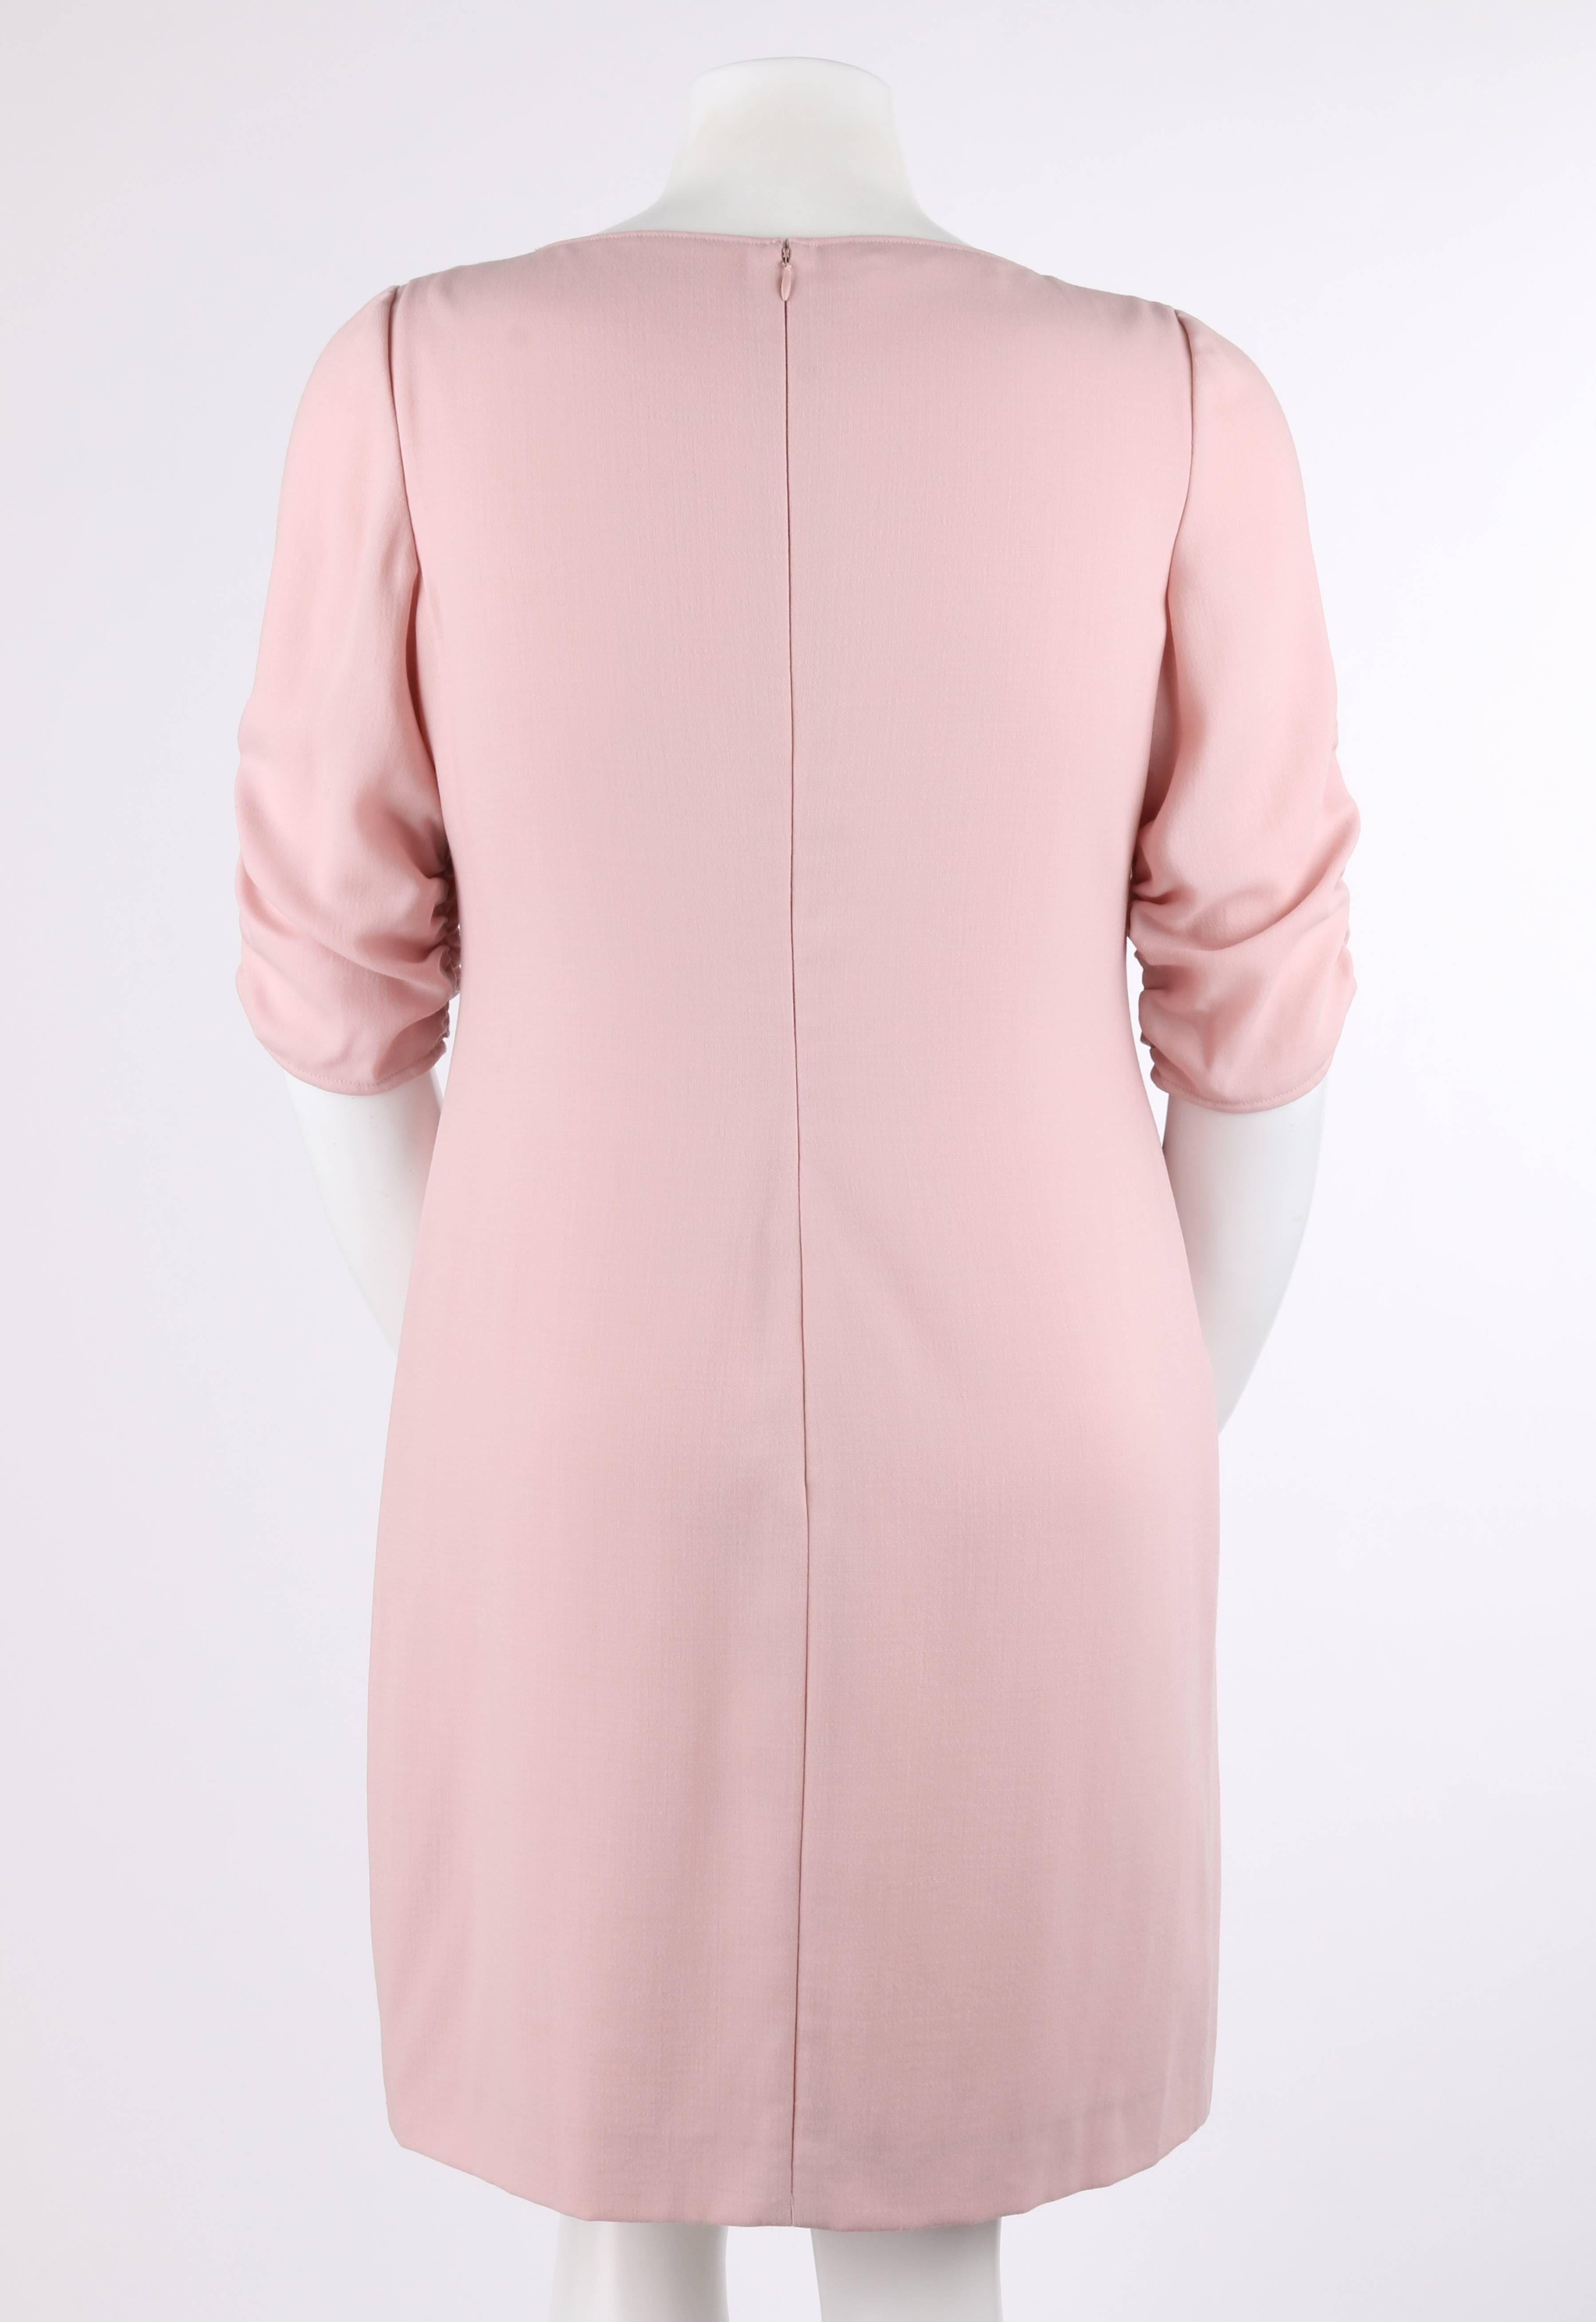 Women's VALENTINO A/W 2007 Blush Pink 100% Wool Ruched Sleeve Cocktail Dress For Sale